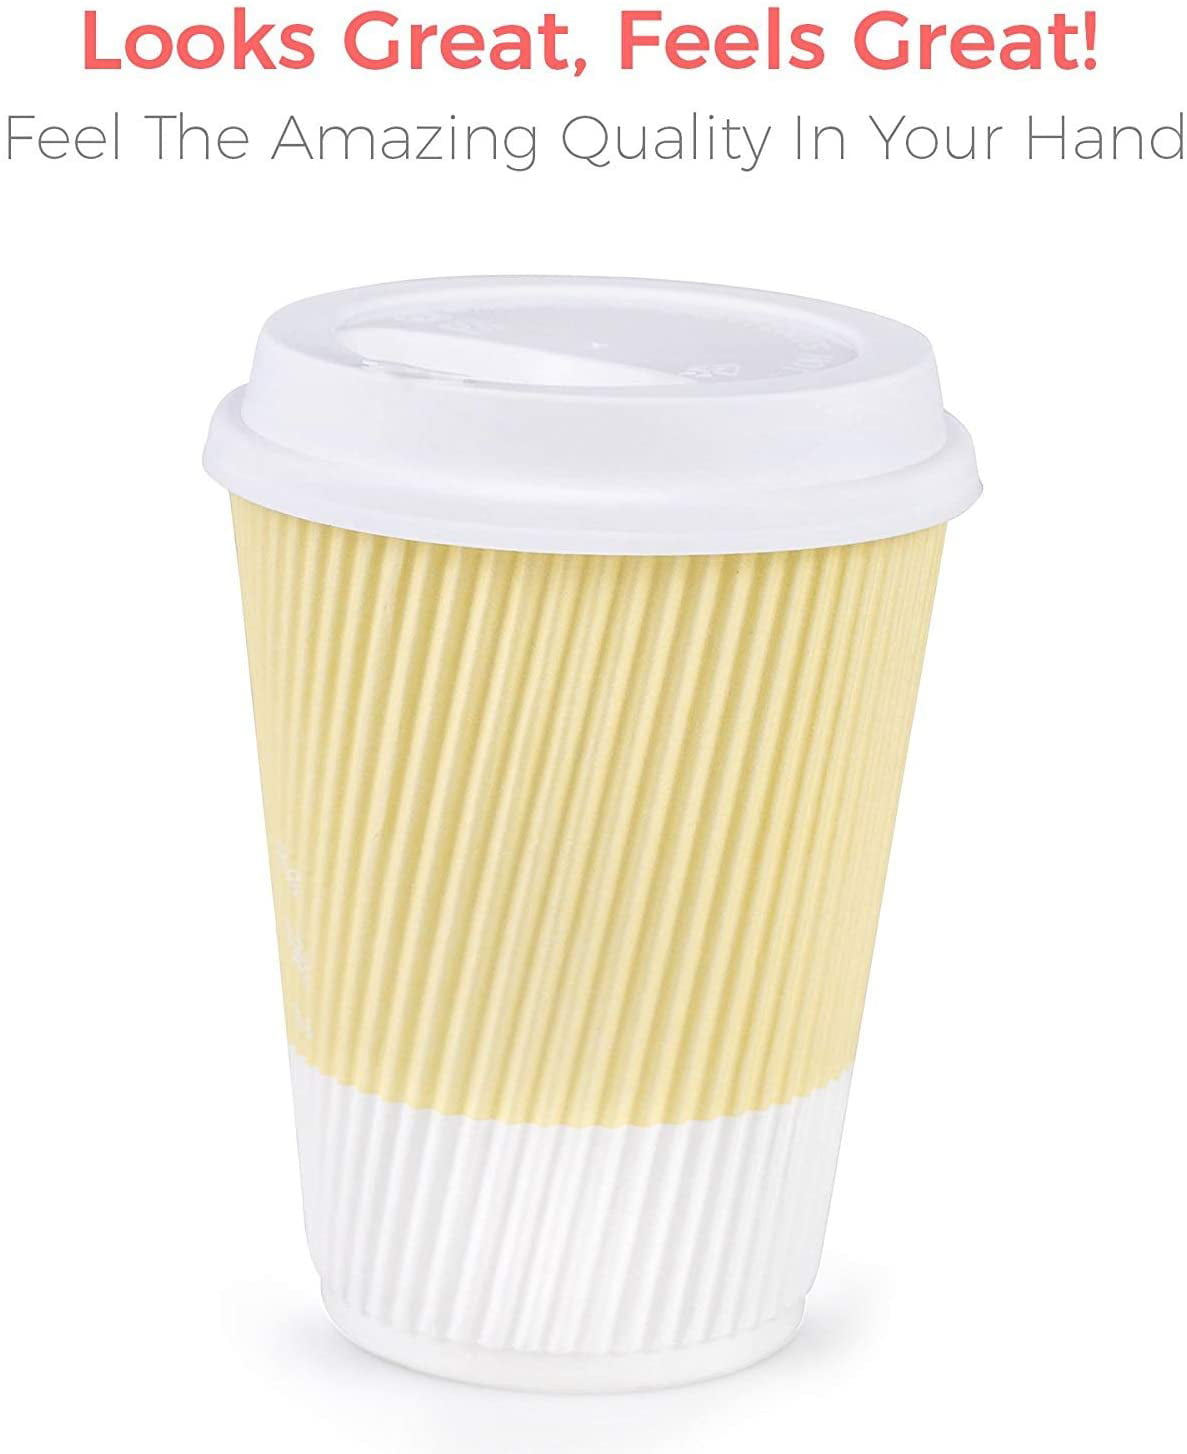 Premium Disposable Coffee Cups With Lids - (90) Durable 12 oz To Go Coffee  Cups With Tight Resealable Lids Prevent Leaks! Sturdy, Insulated For Hot  Beverages. Will Not Bend With Heat Or